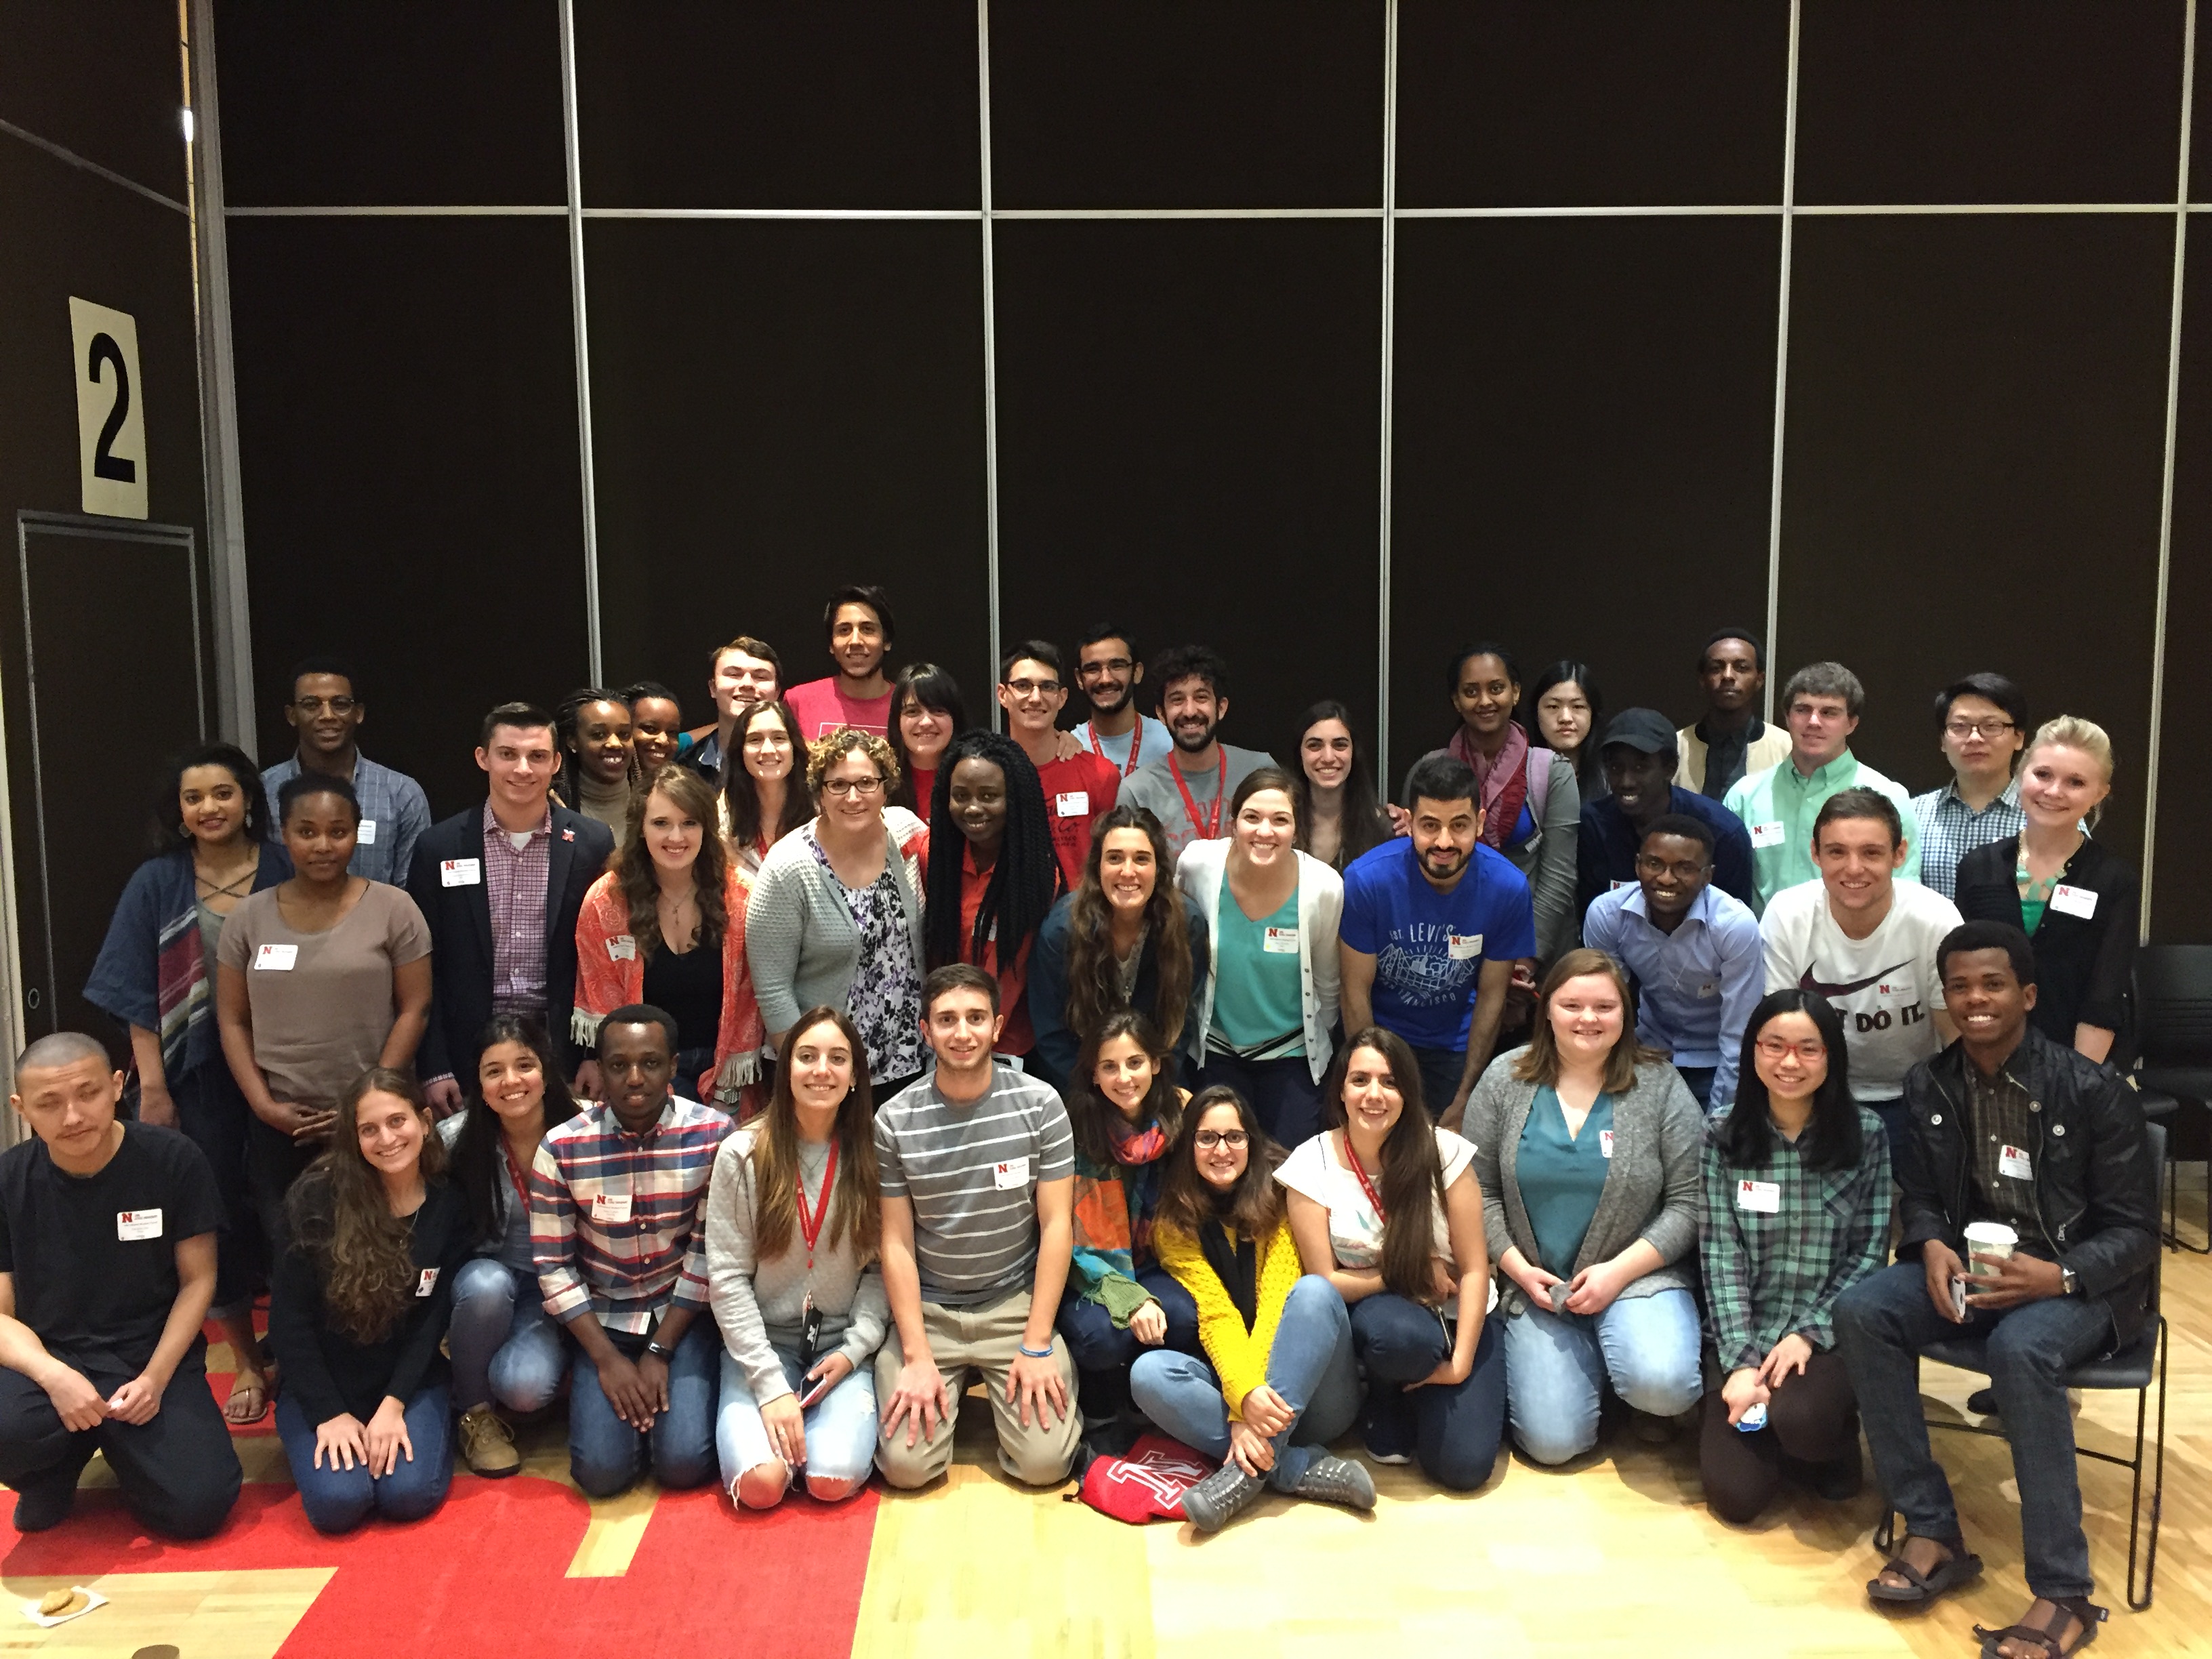 The international and domestic group consisted of American, Argentine, Rwandan and Chinese students at the University of Nebraska